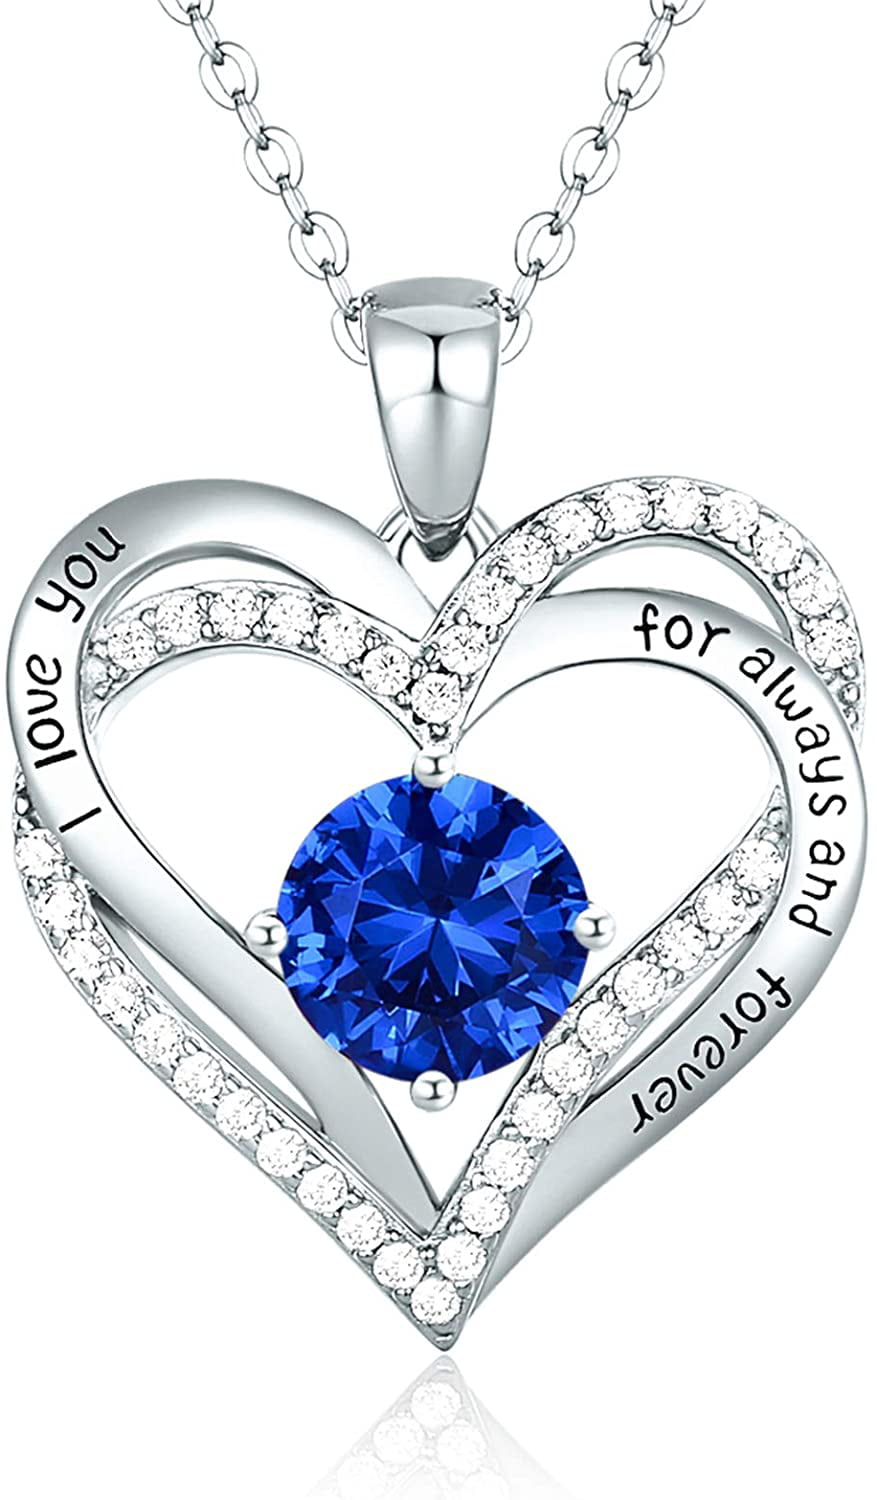 Details about   Blue Sapphire & Diamond Heart Pendant Necklace 14K Rose Gold Over Sterling 18"